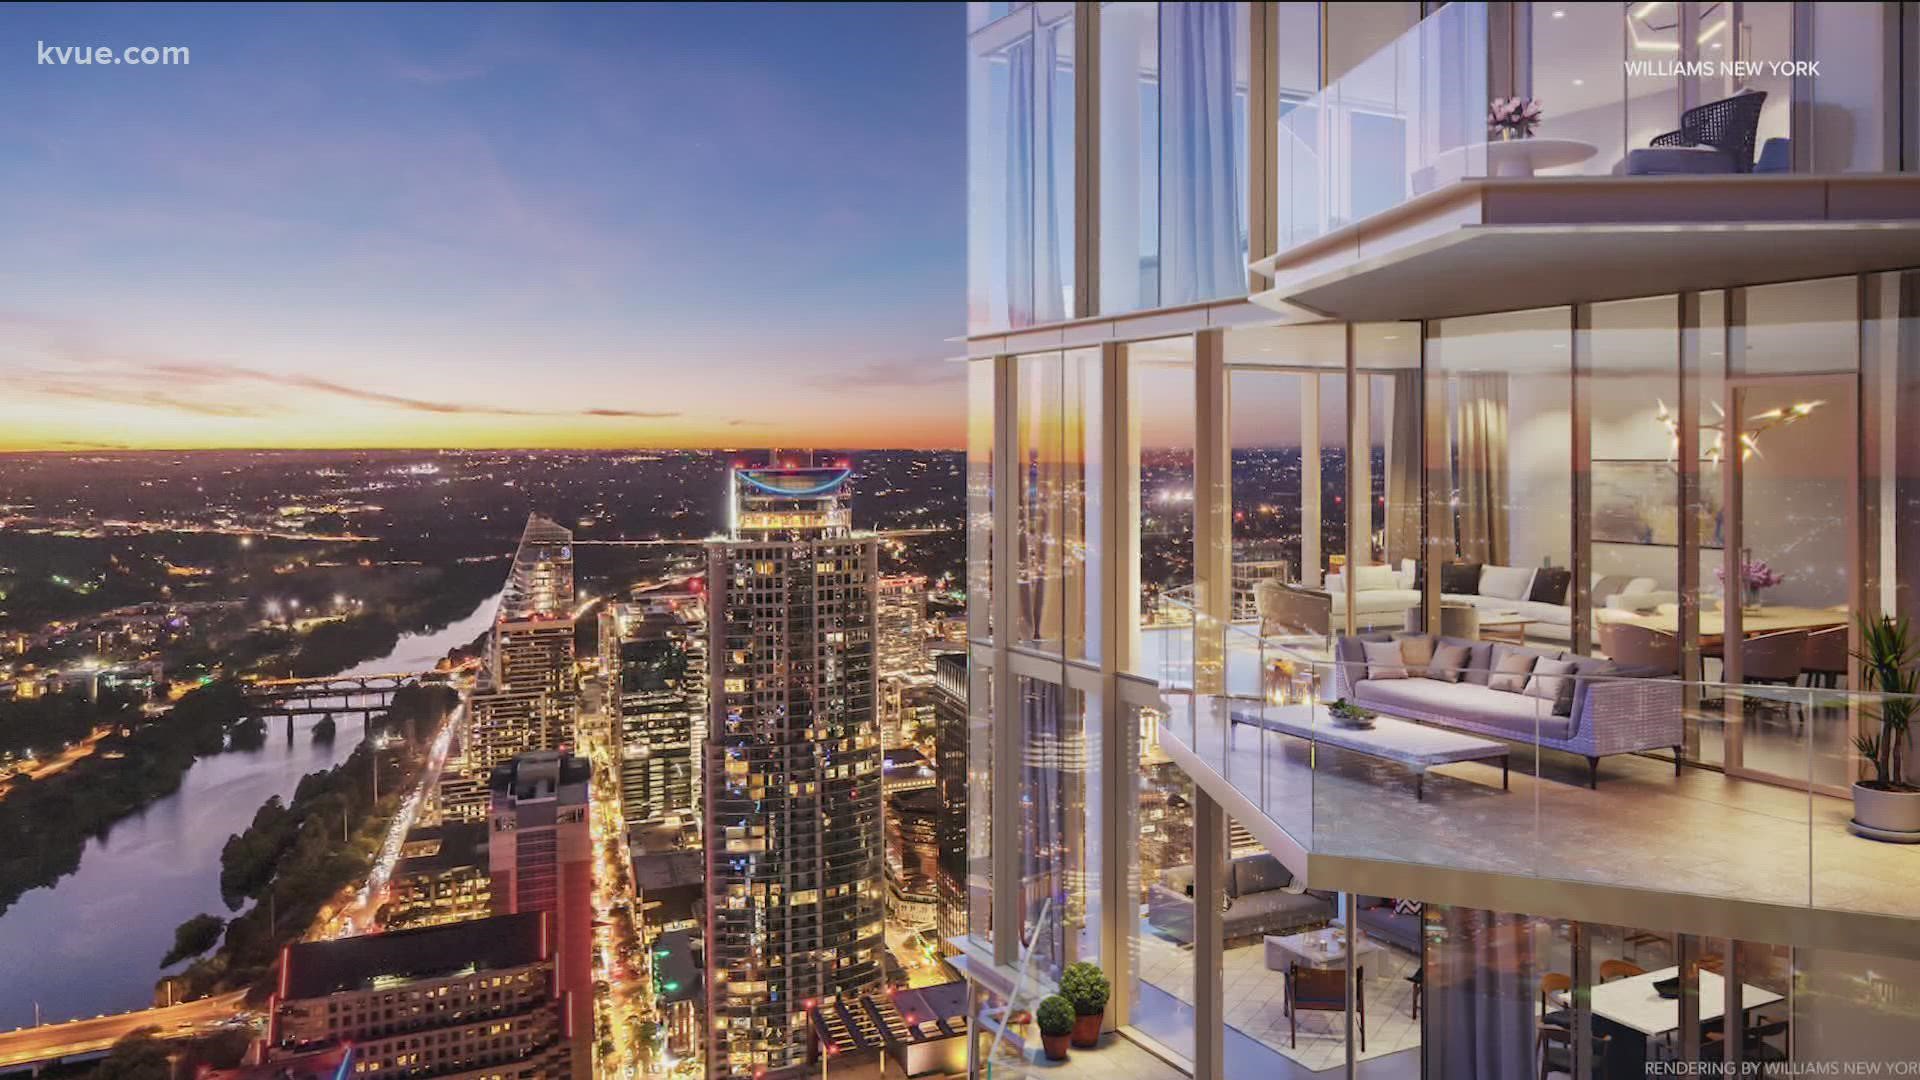 The hotel giant is announcing plans to build a 65-story luxury high-rise building that promises to be Austin's tallest.